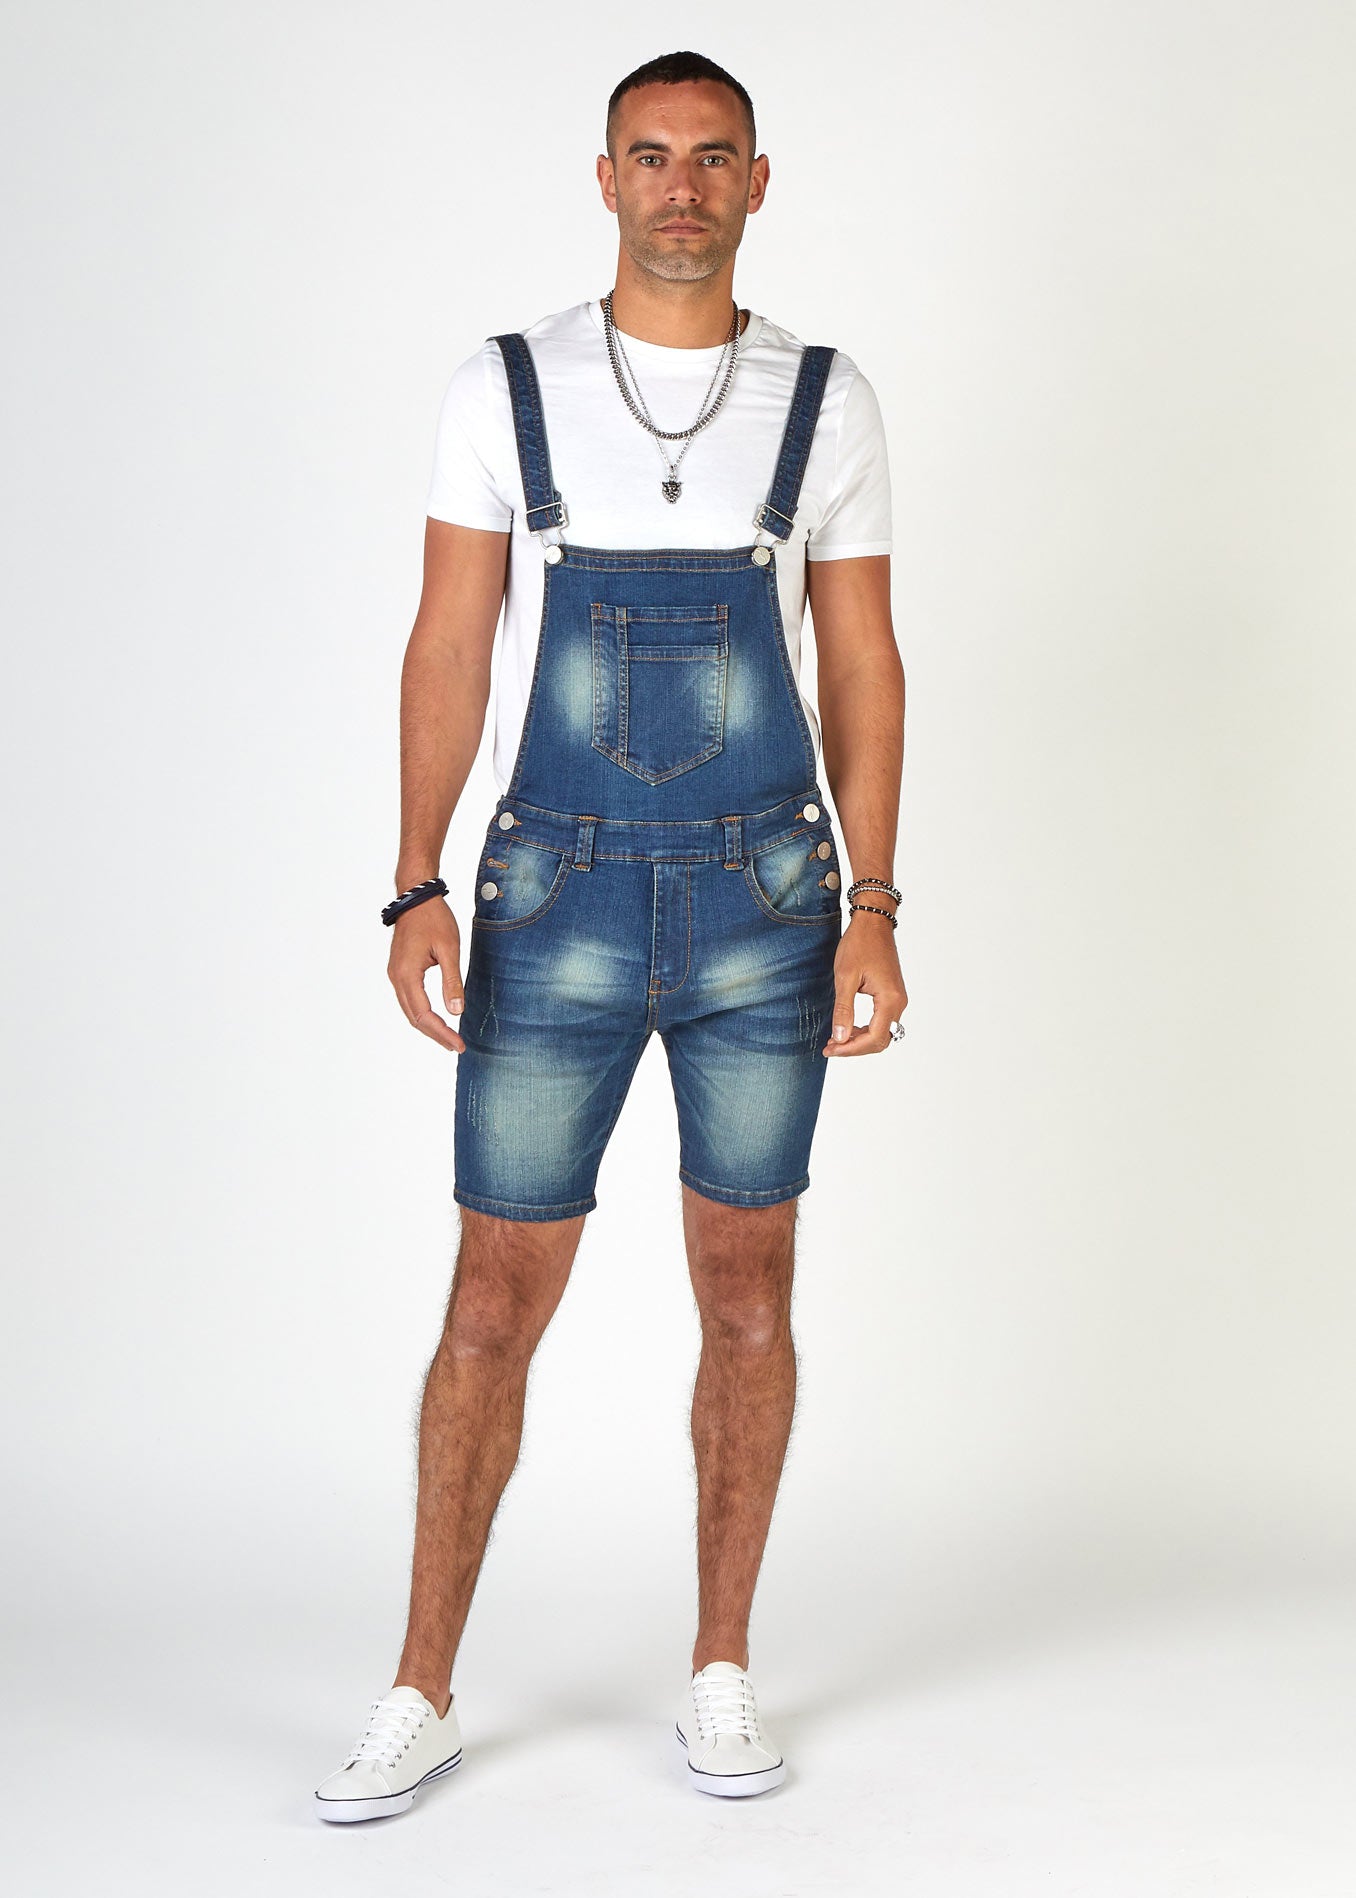 Full-length front view of stylish 'Whitefield' bib-overall super skinny denim dungaree shorts with clear view of pockets and adjustable straps.